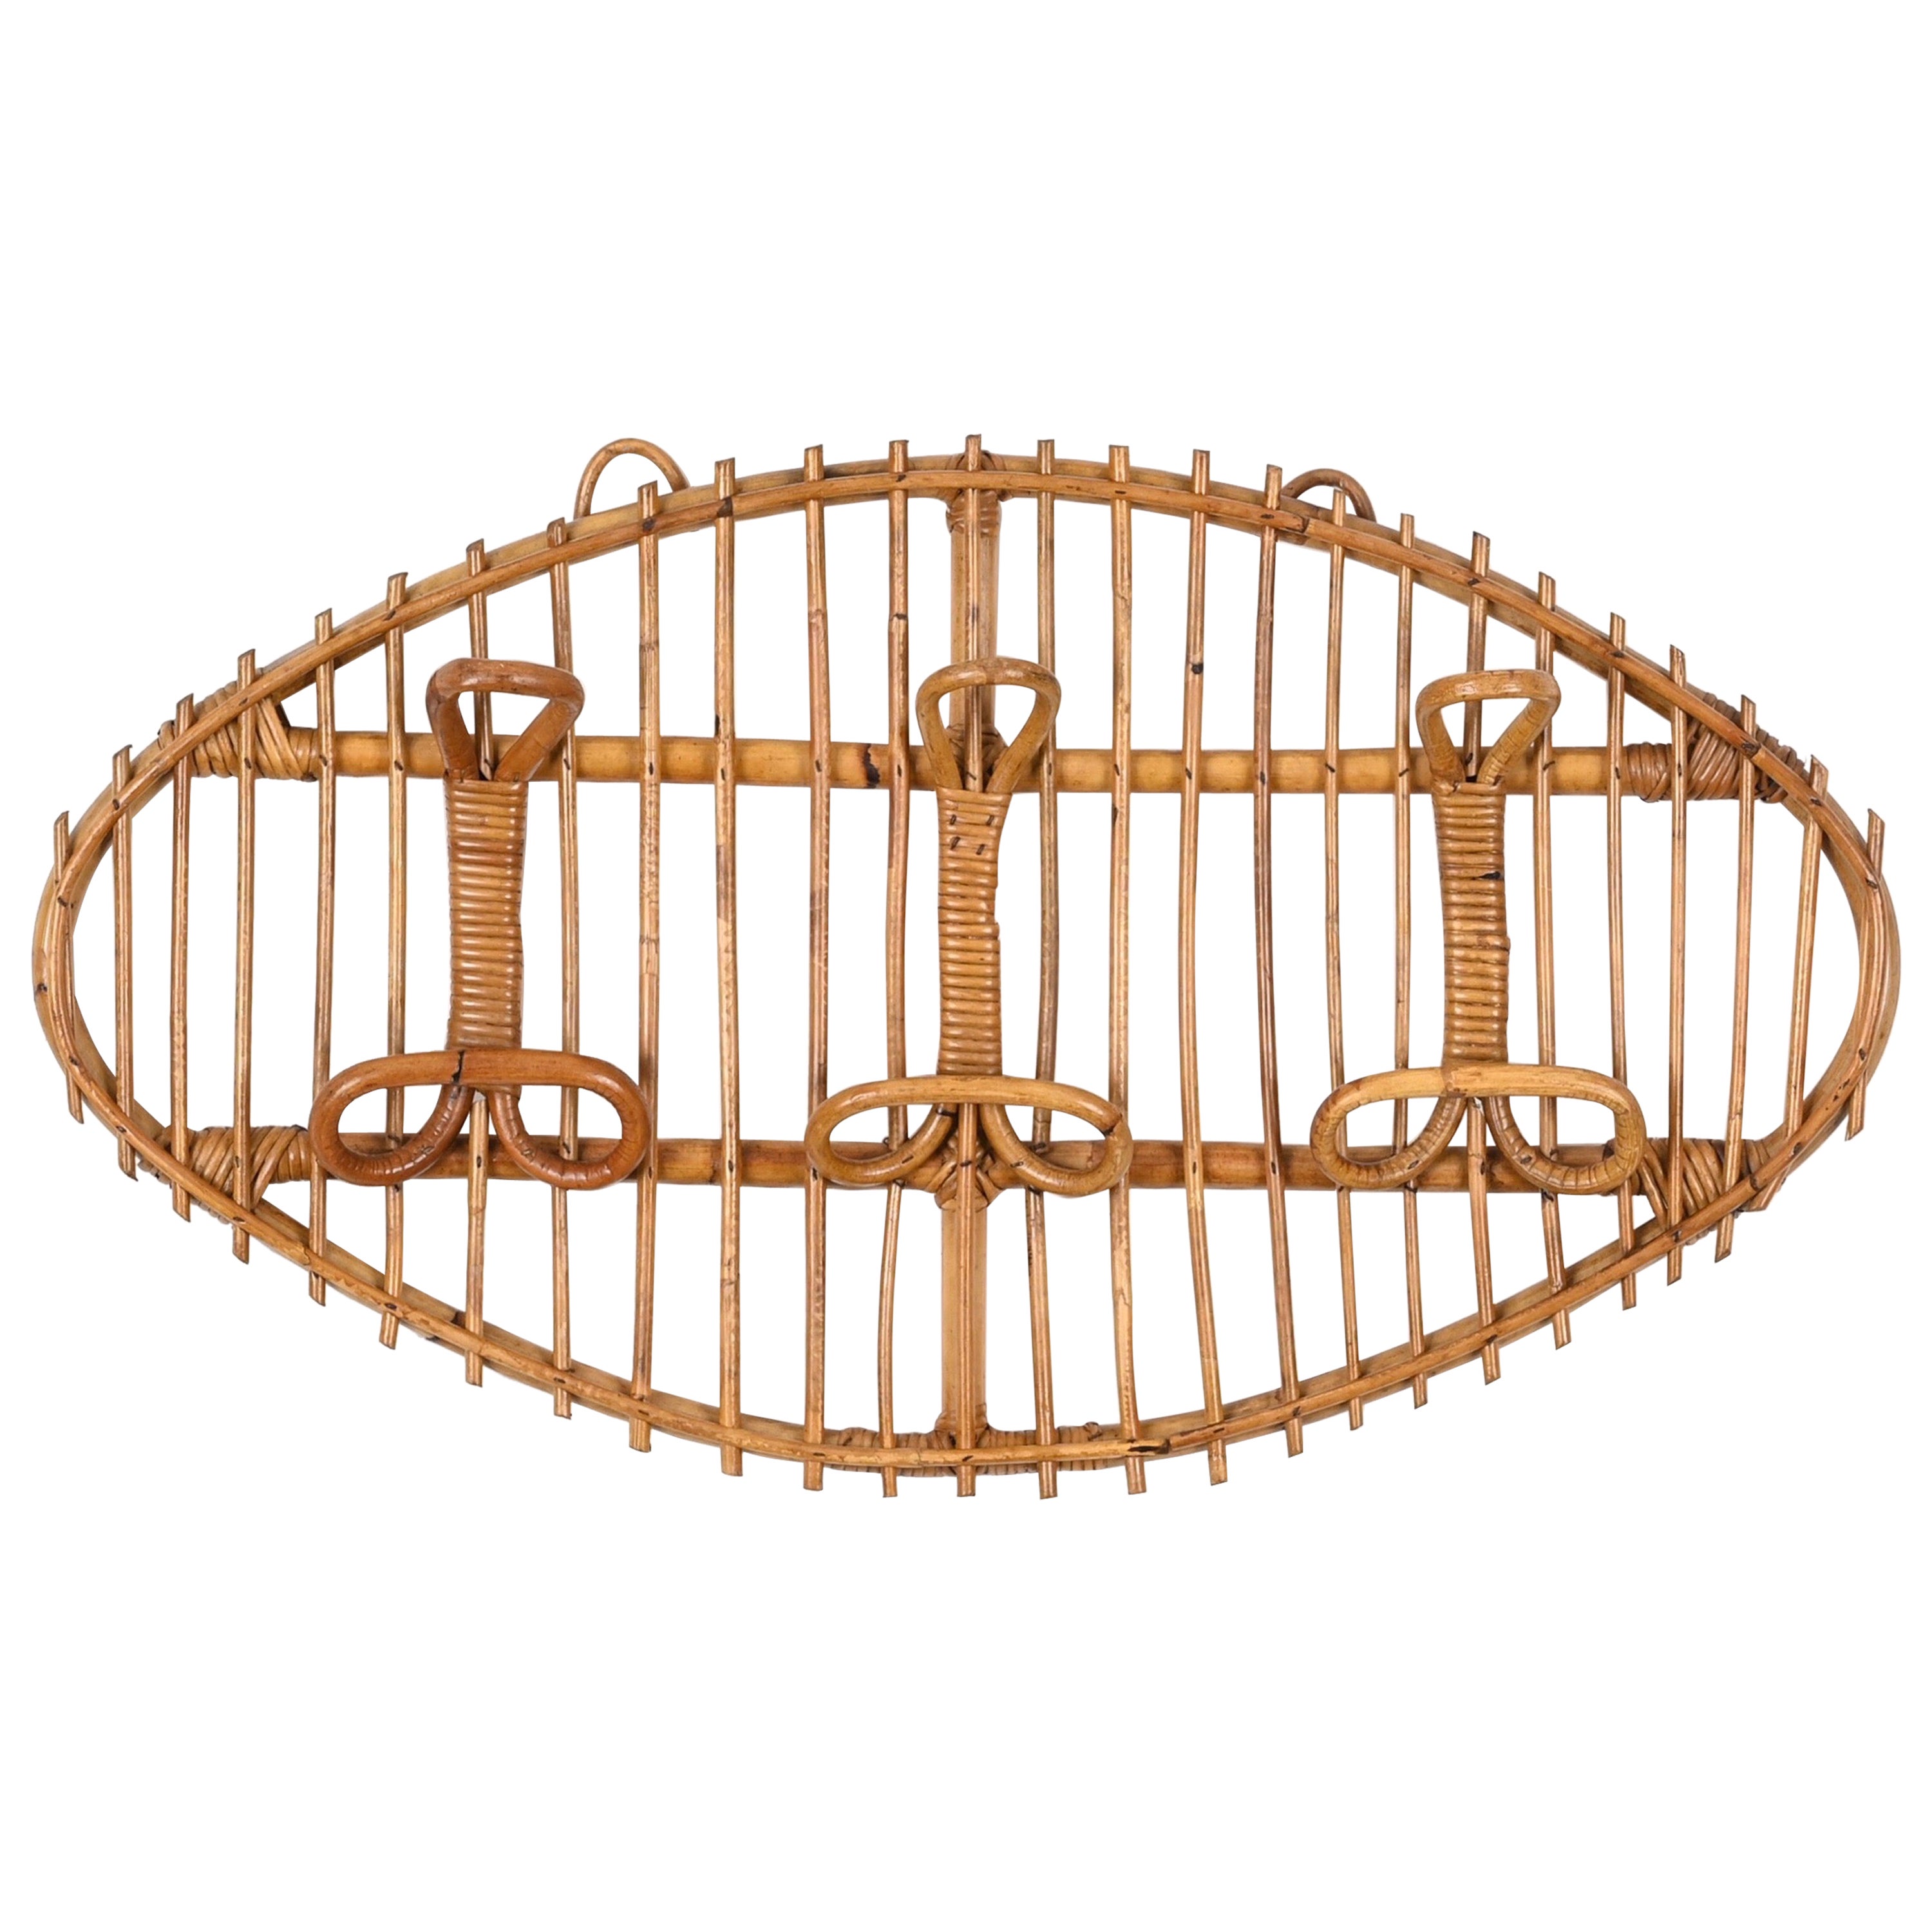 Midcentury French Riviera Rattan, Wicker, Curved Bamboo Coat Rack, Italy 1960s For Sale